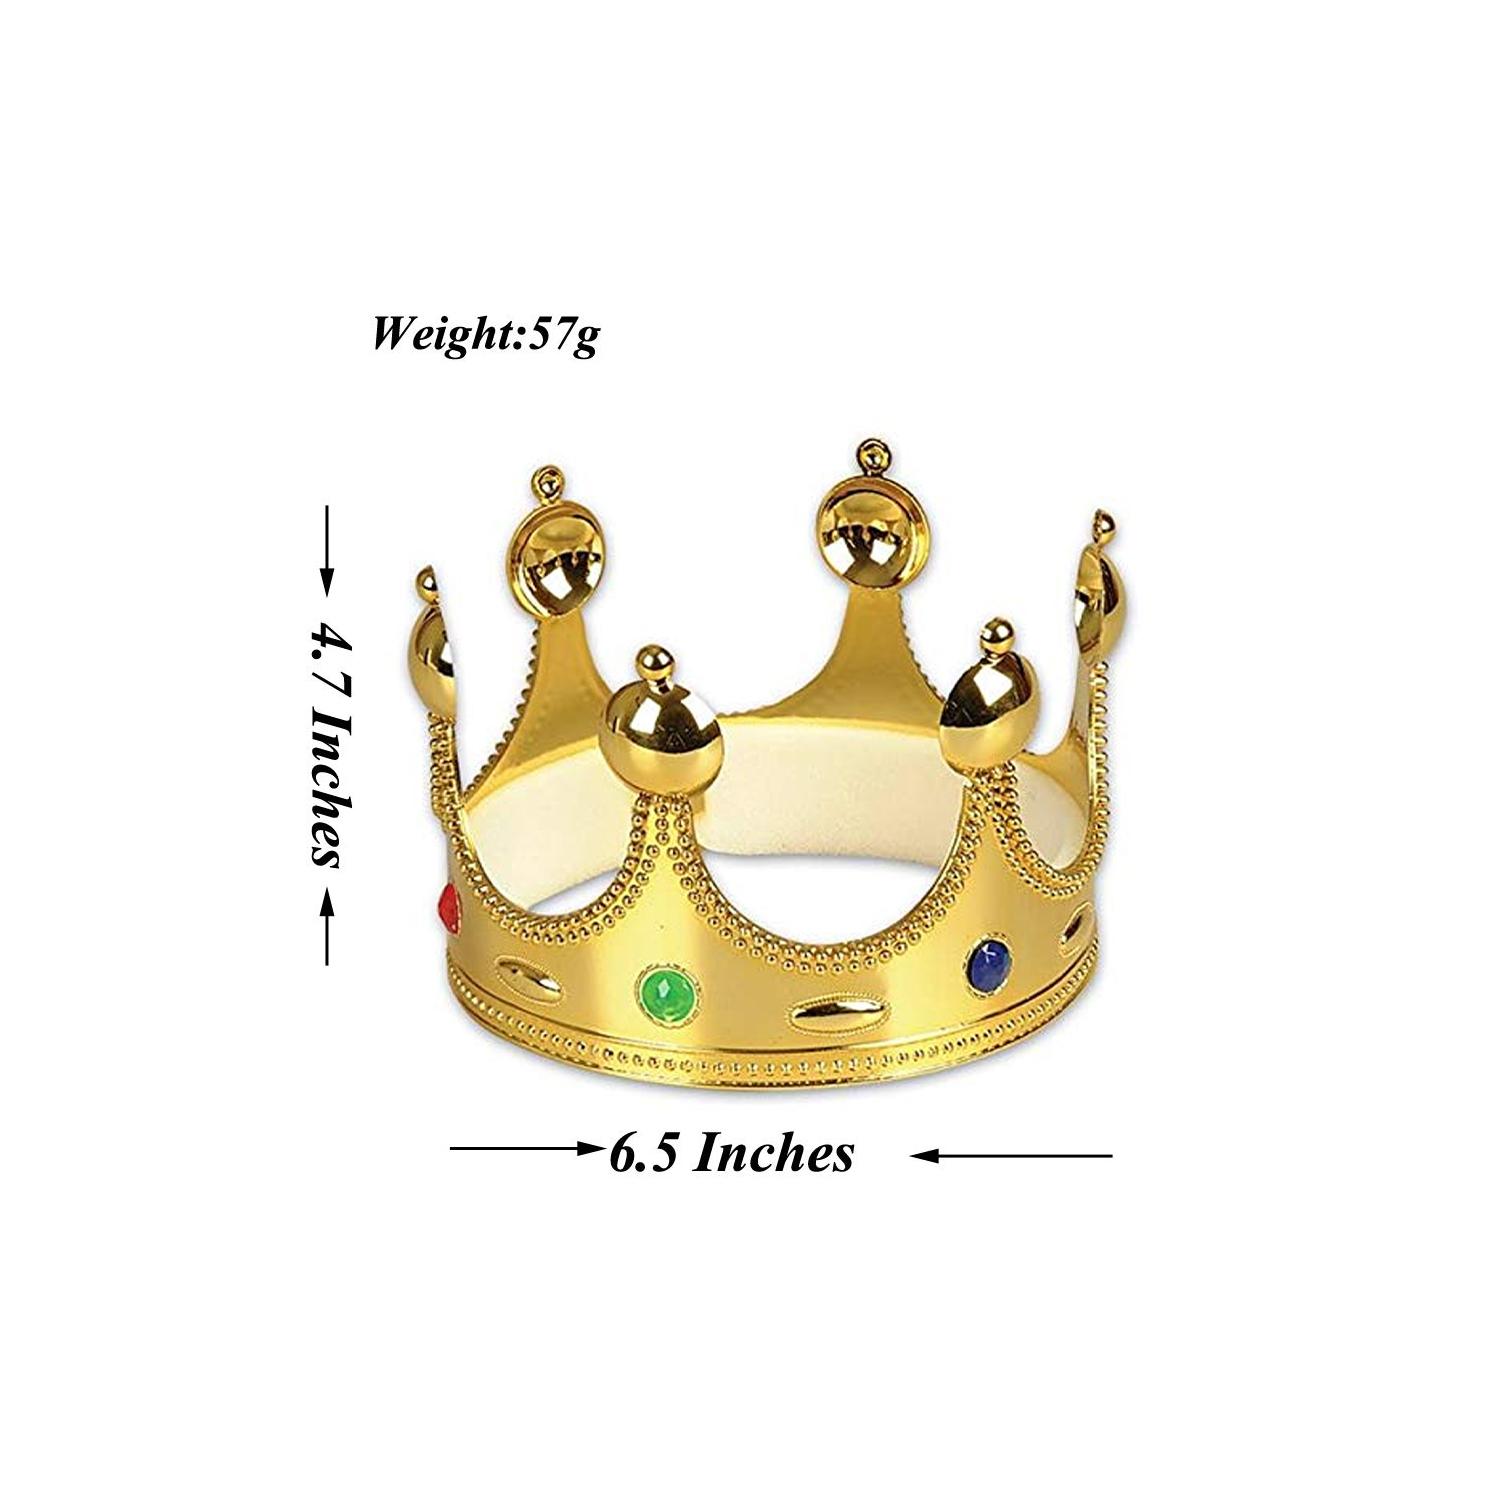 MAJESTIC GOLD CROWN